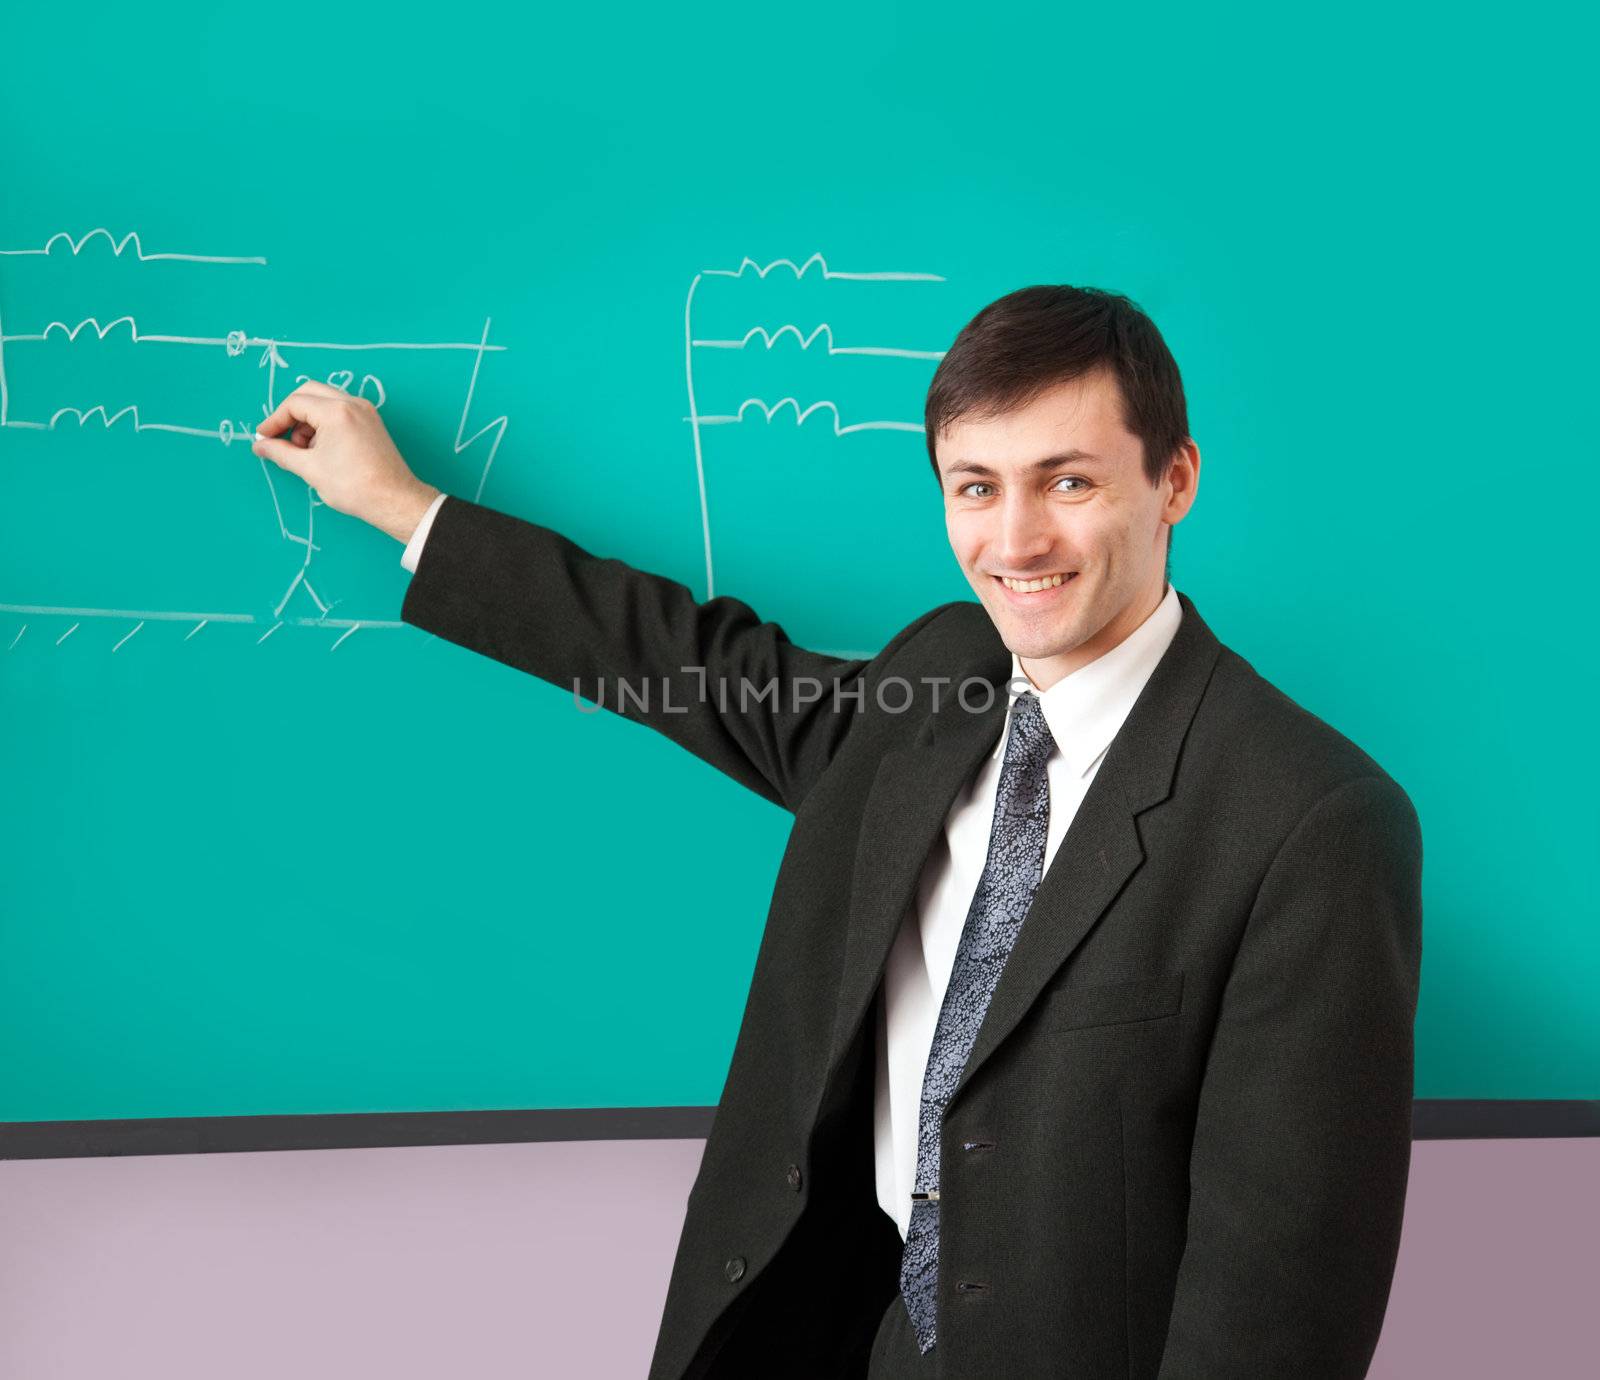 Young scientist giving a lecture on the background of the chalkboard with the scheme.